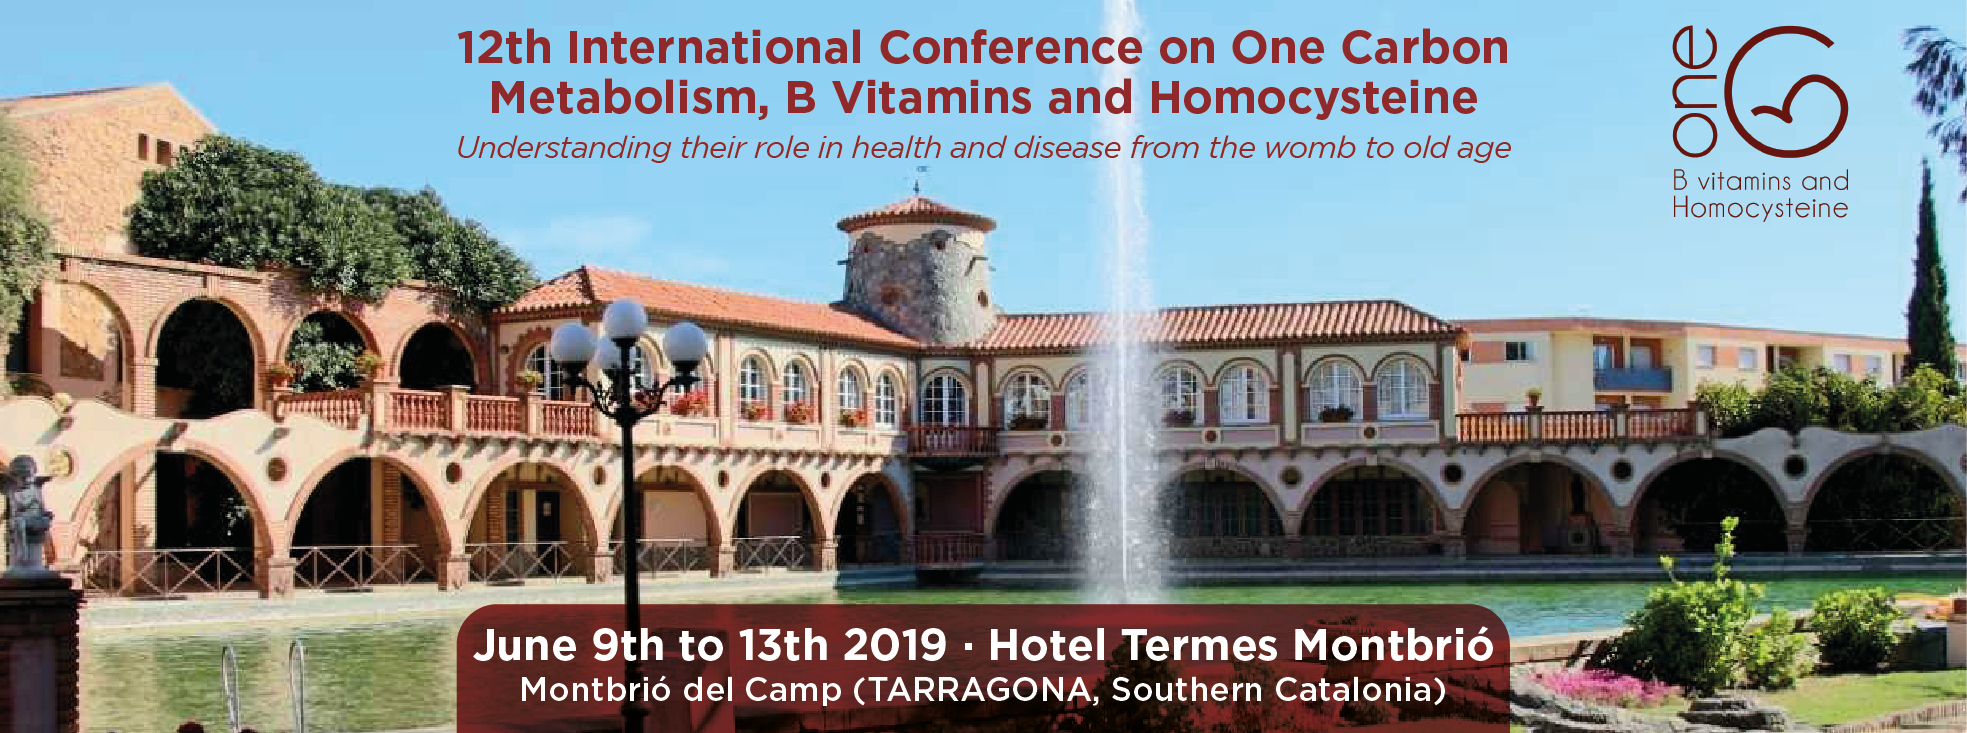 12th International Conference on One-Carbon Metabolism, B Vitamins and Homocysteine